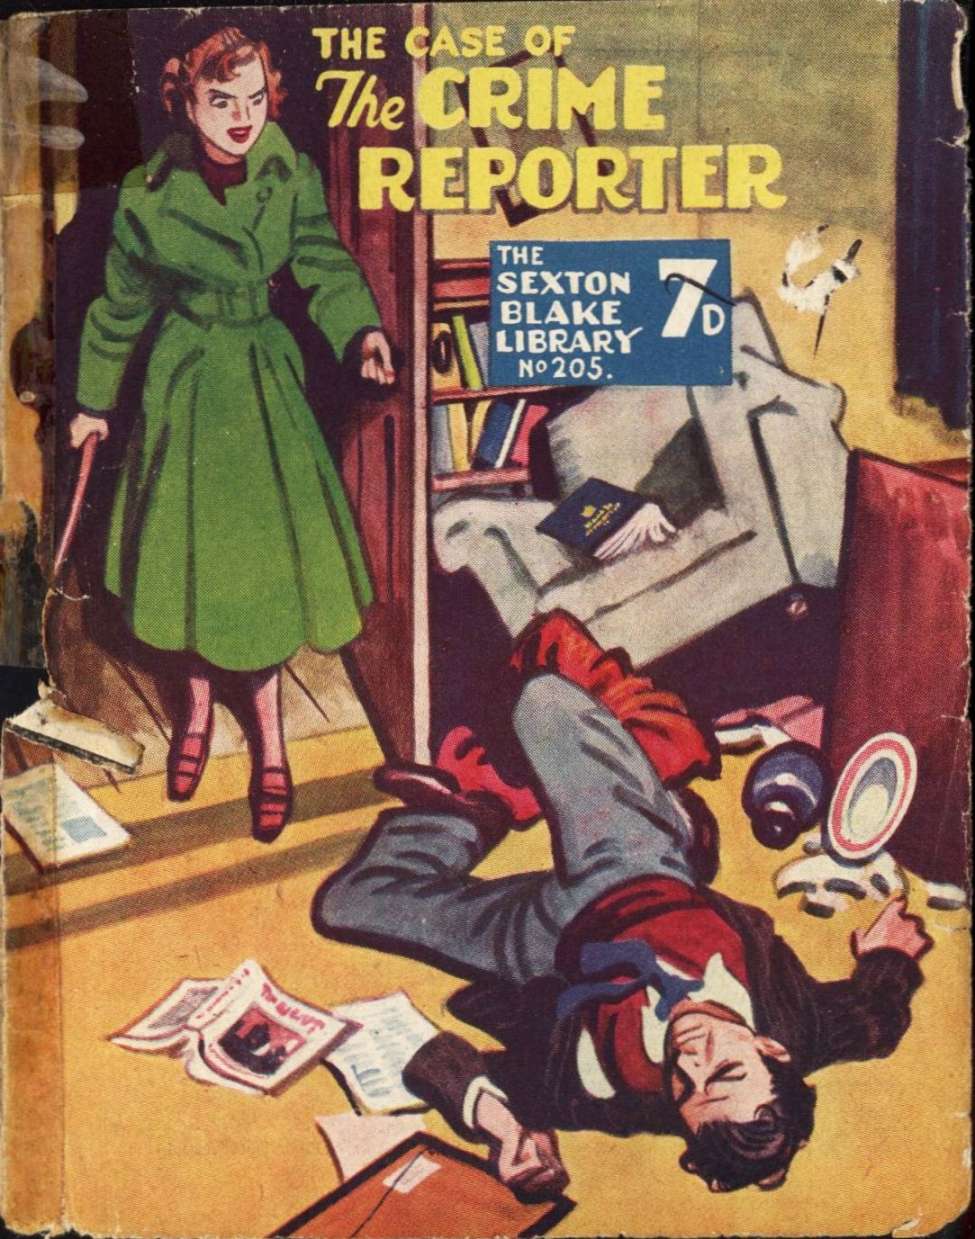 Book Cover For Sexton Blake Library S3 205 - The Case of the Crime Reporter